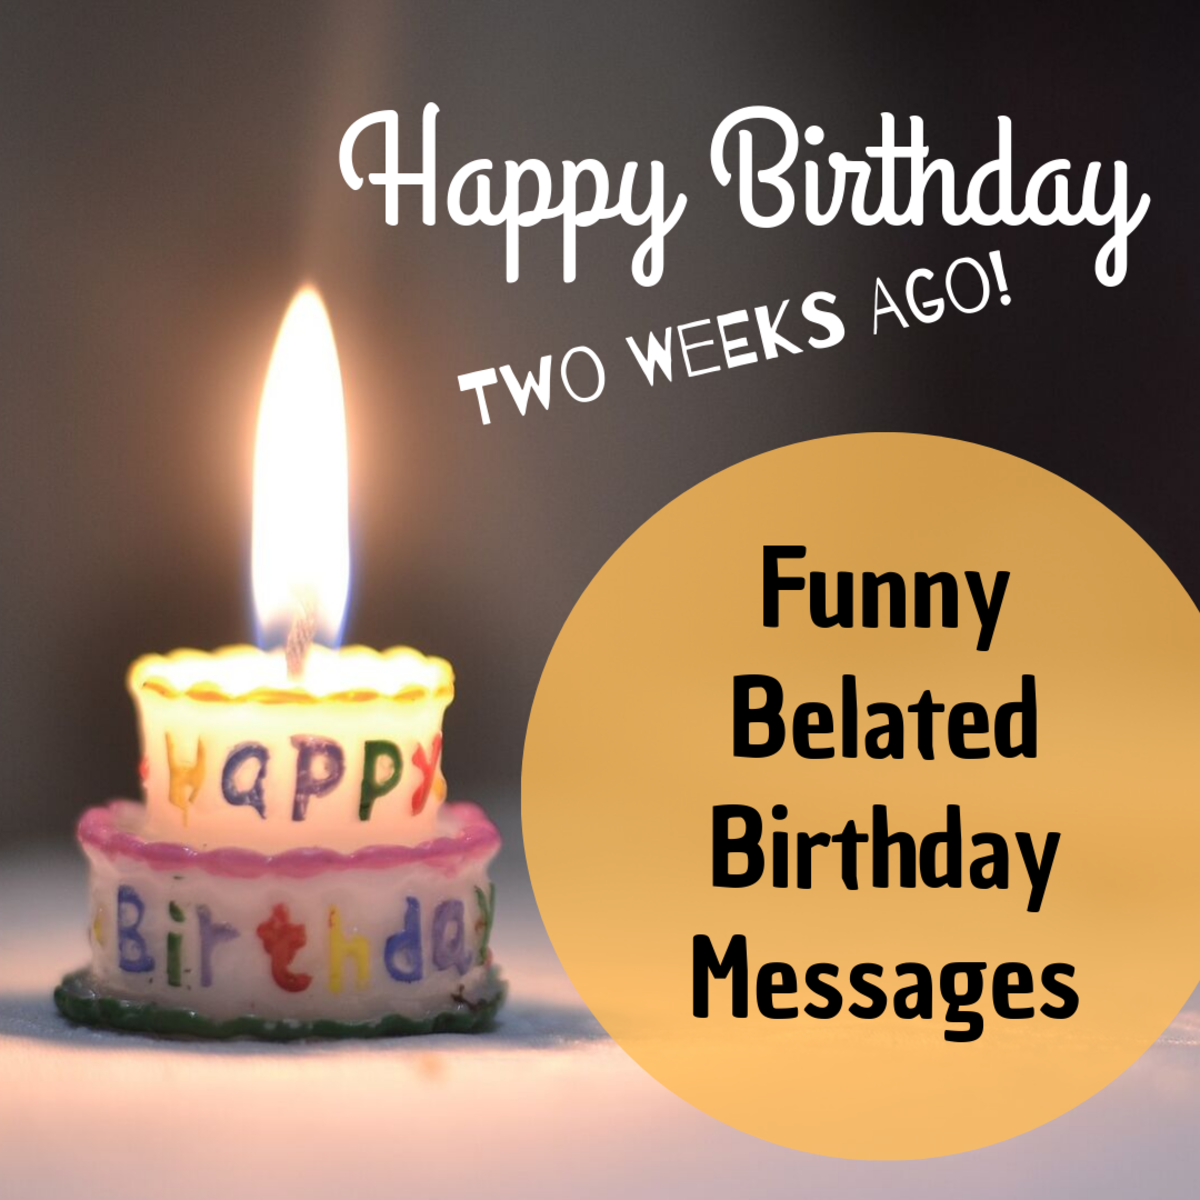 Funny Belated Happy Birthday Wishes: Late Messages and ...